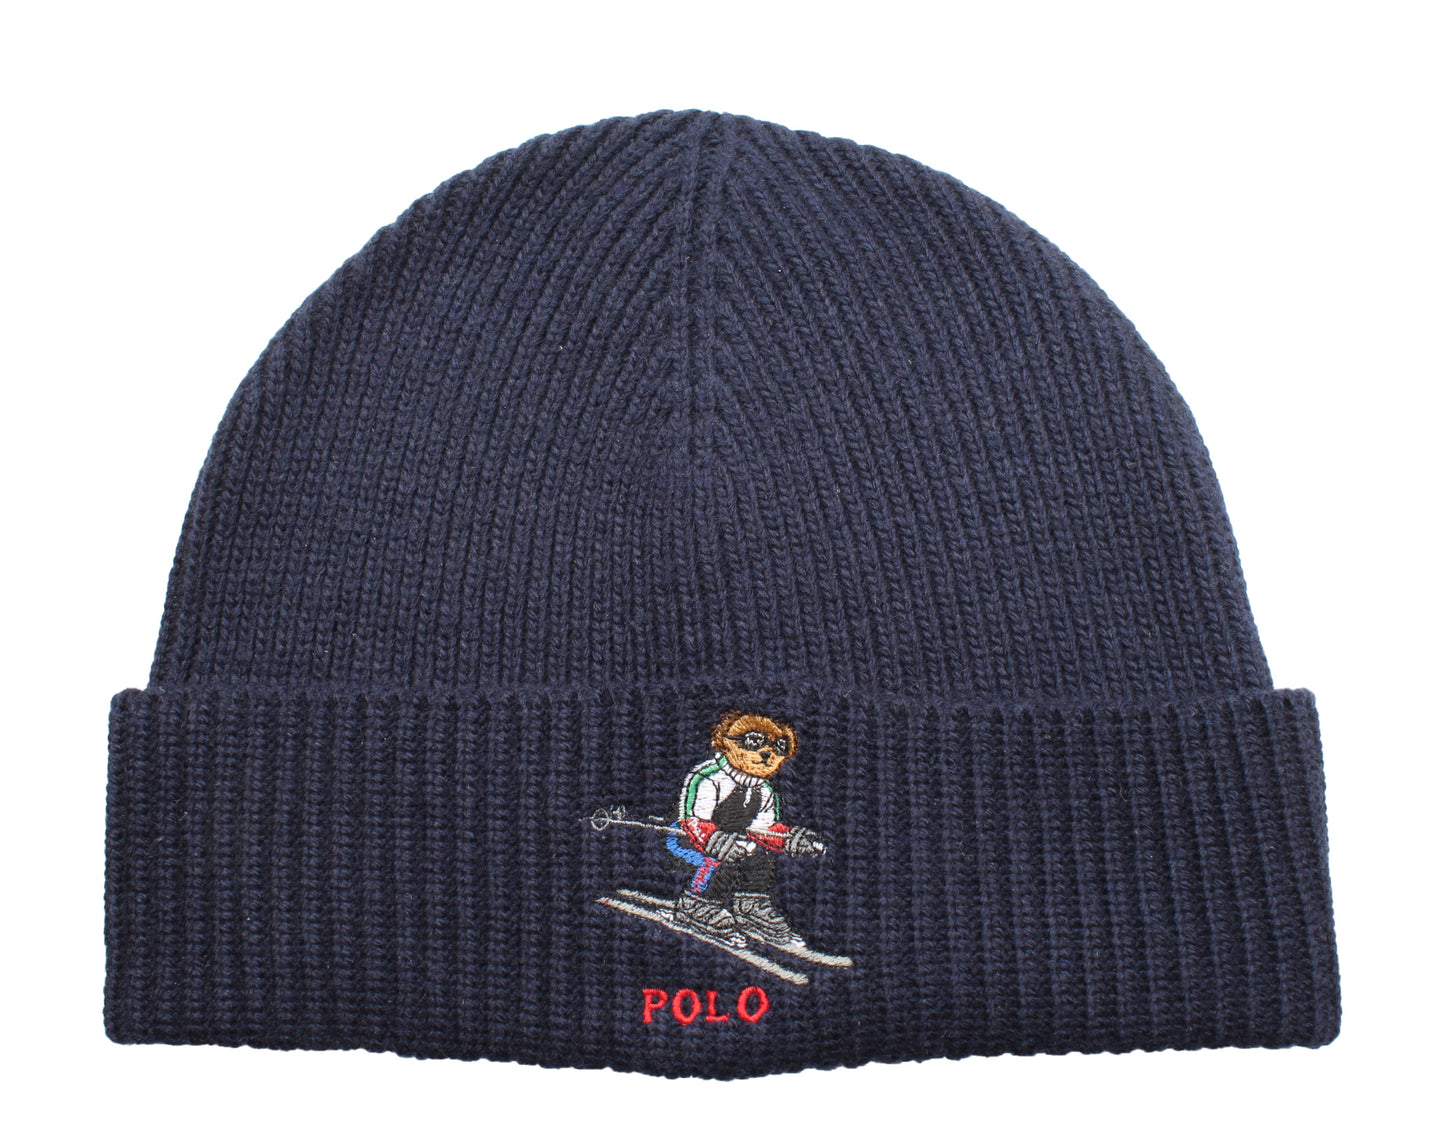 Polo Ralph Lauren Polo Bear Extreme Skiing Knit Cuffed Hat